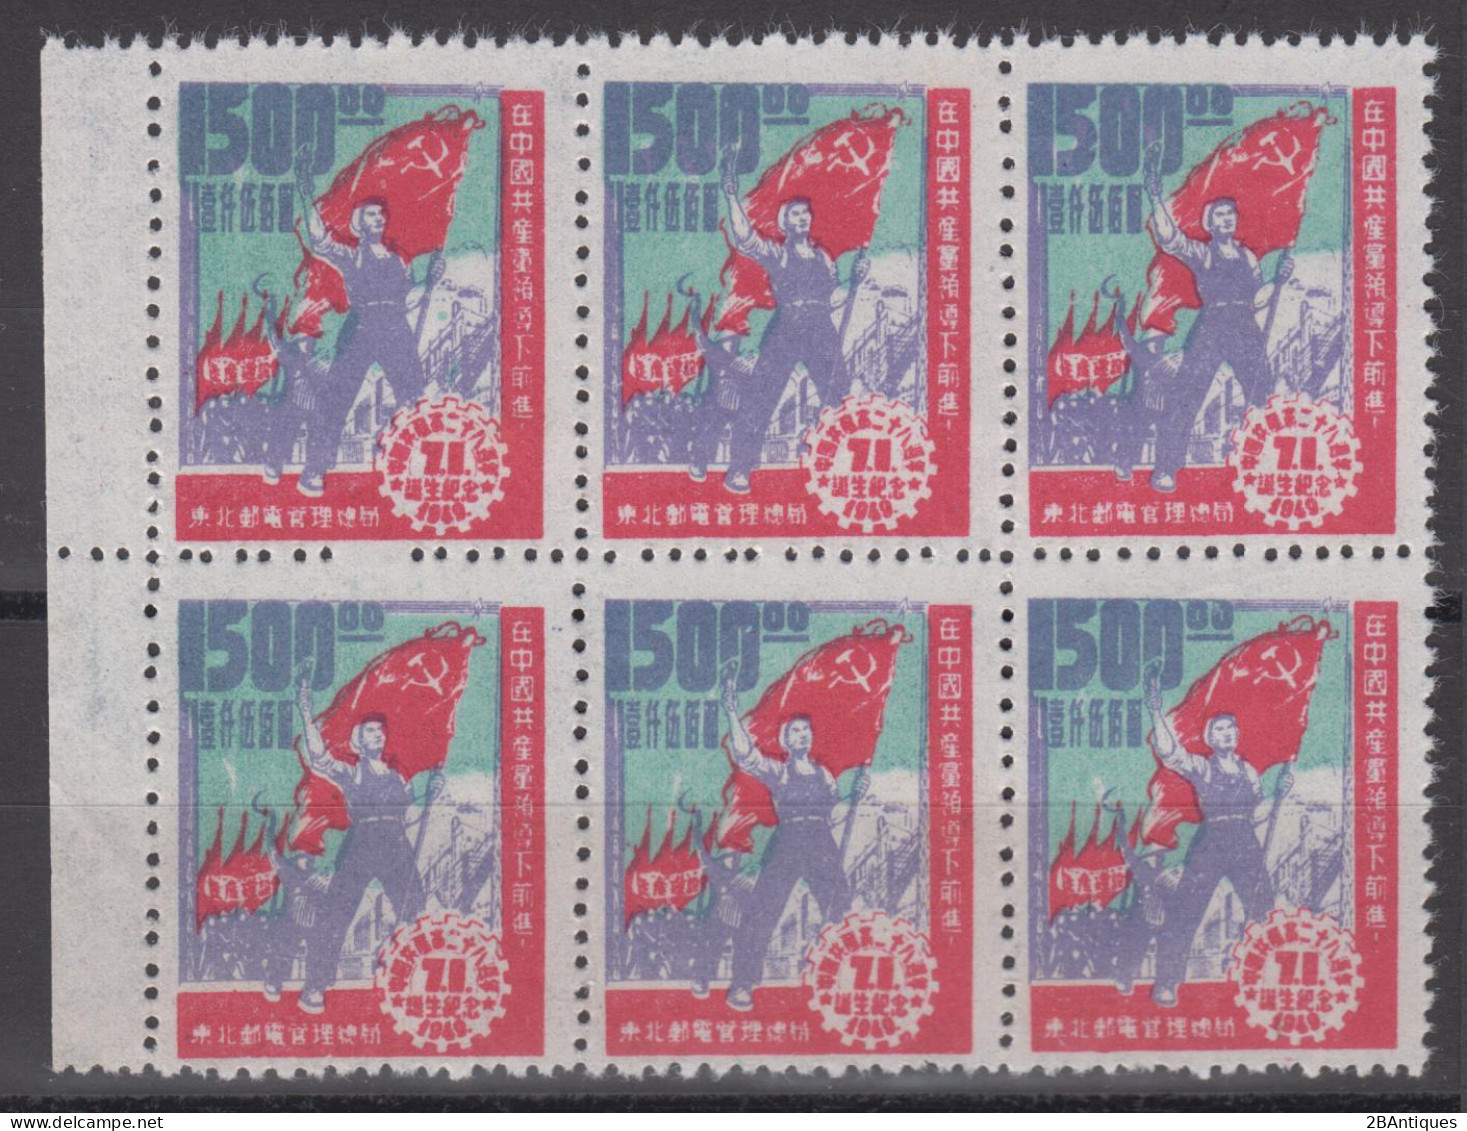 NORTHEAST CHINA 1949 - The 28th Anniversary Of Chinese Communist Party BLOCK OF 6! - Chine Du Nord-Est 1946-48